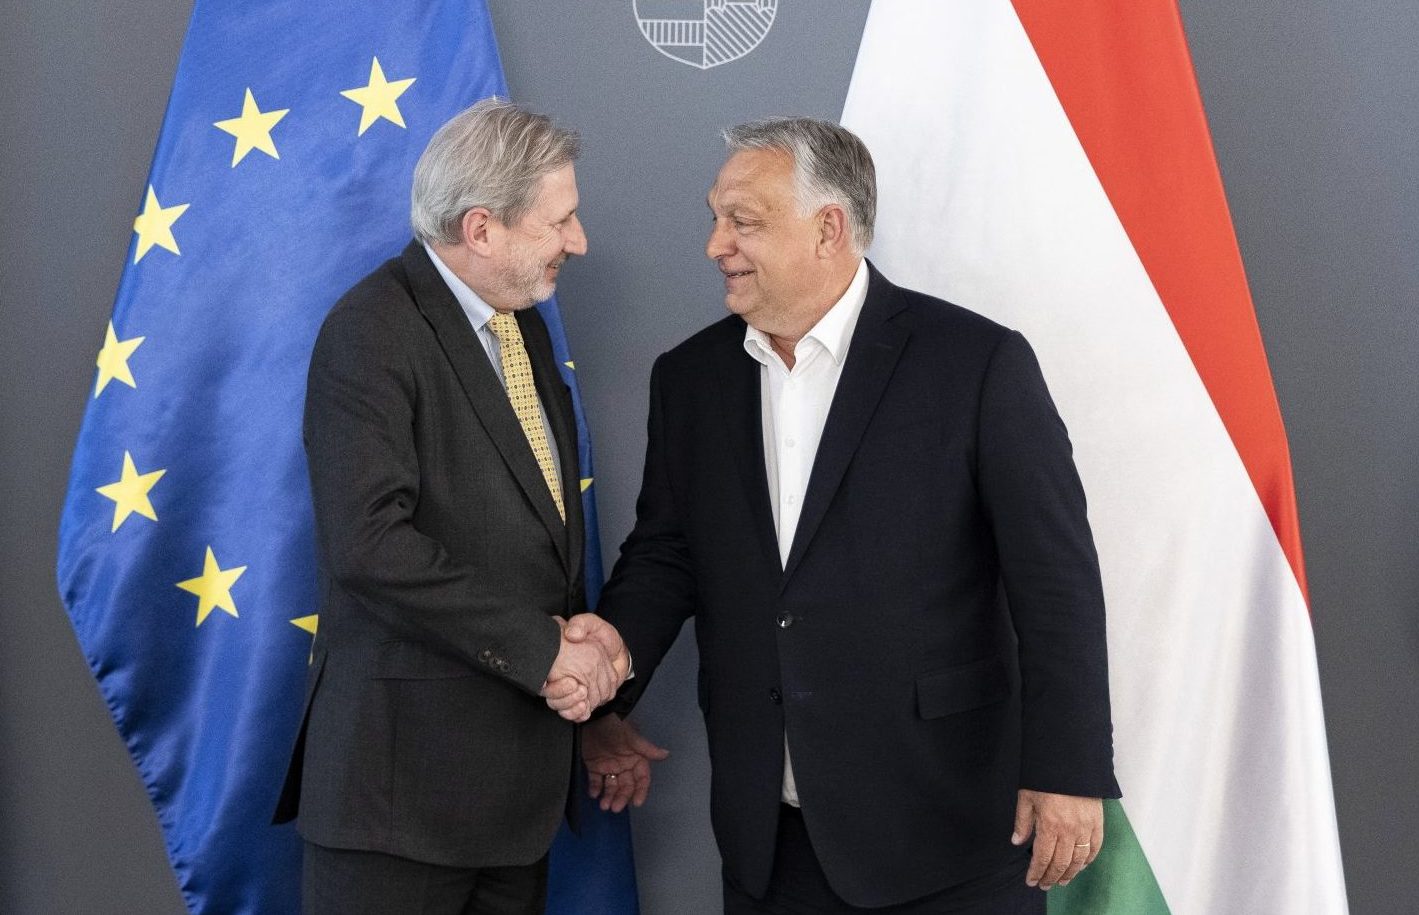 Viktor Orbán Negotiates About EU Funds in Budapest